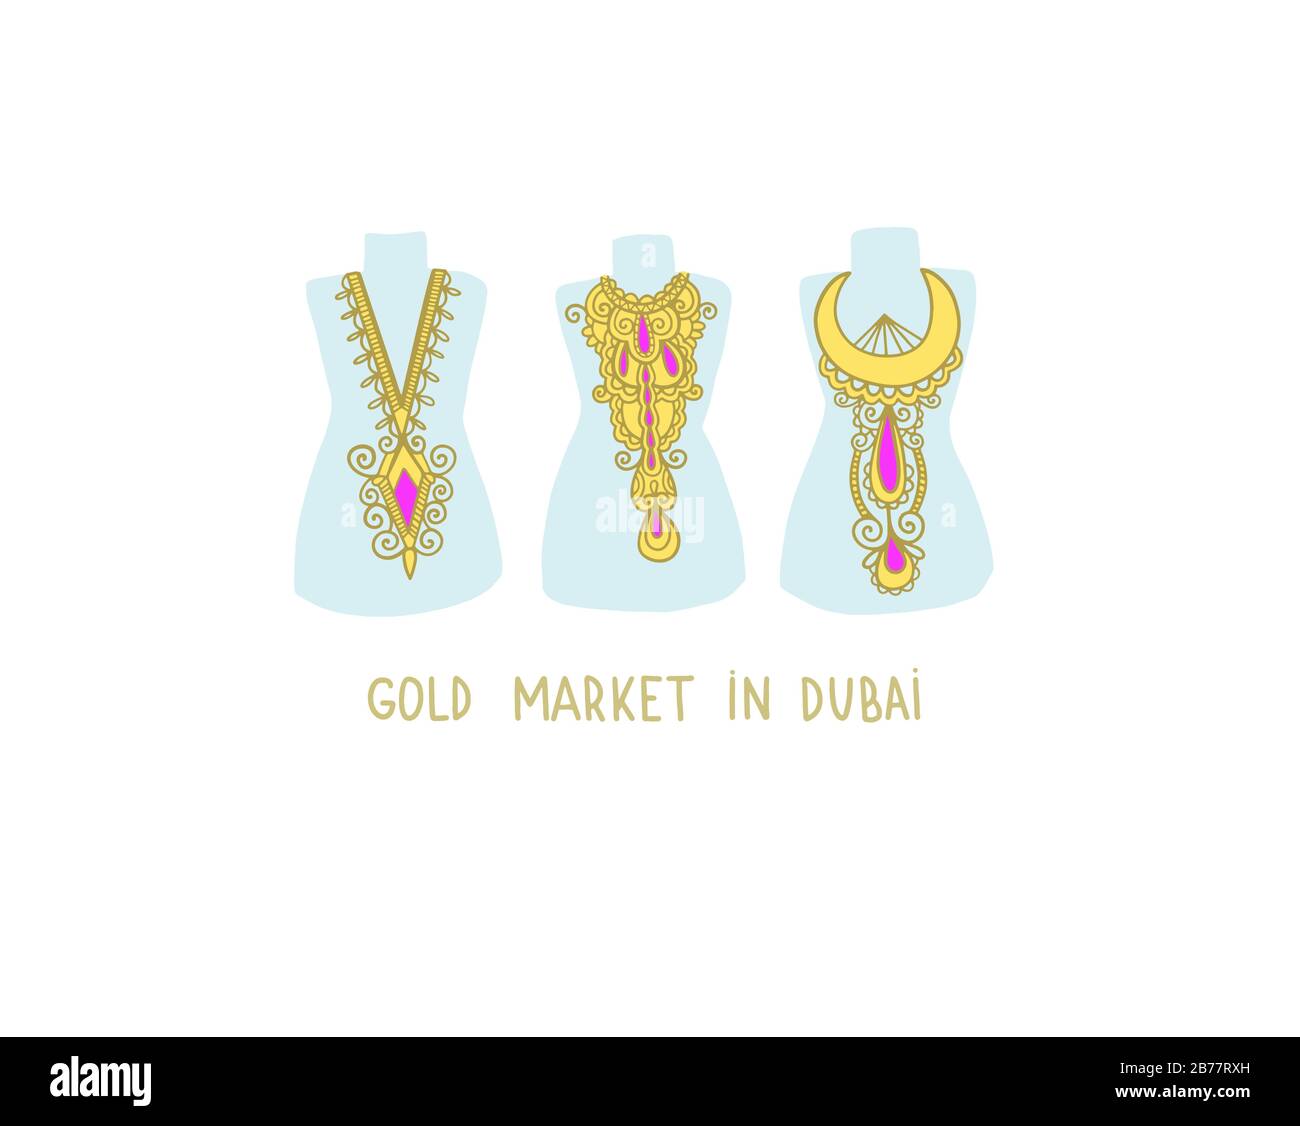 gold market in Dubai - hand drawing flat style icon of famous place in Dubai, United Arab Emirates, Middle East Stock Vector